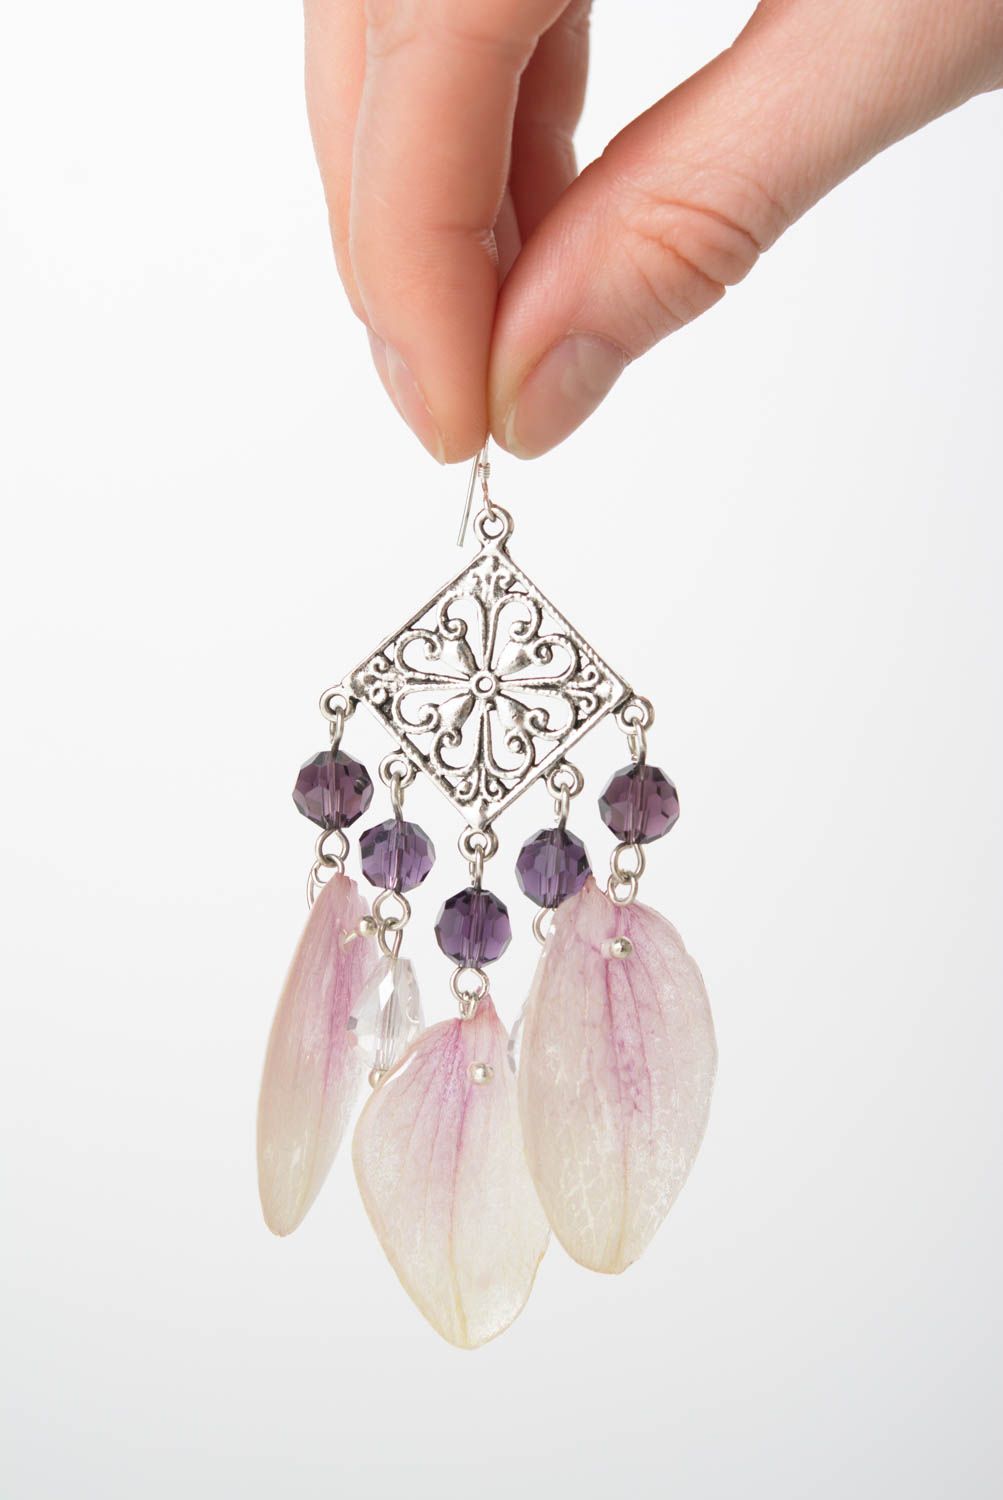 Handmade botanic earrings with orchid petals in epoxy resin large summer accessory photo 5